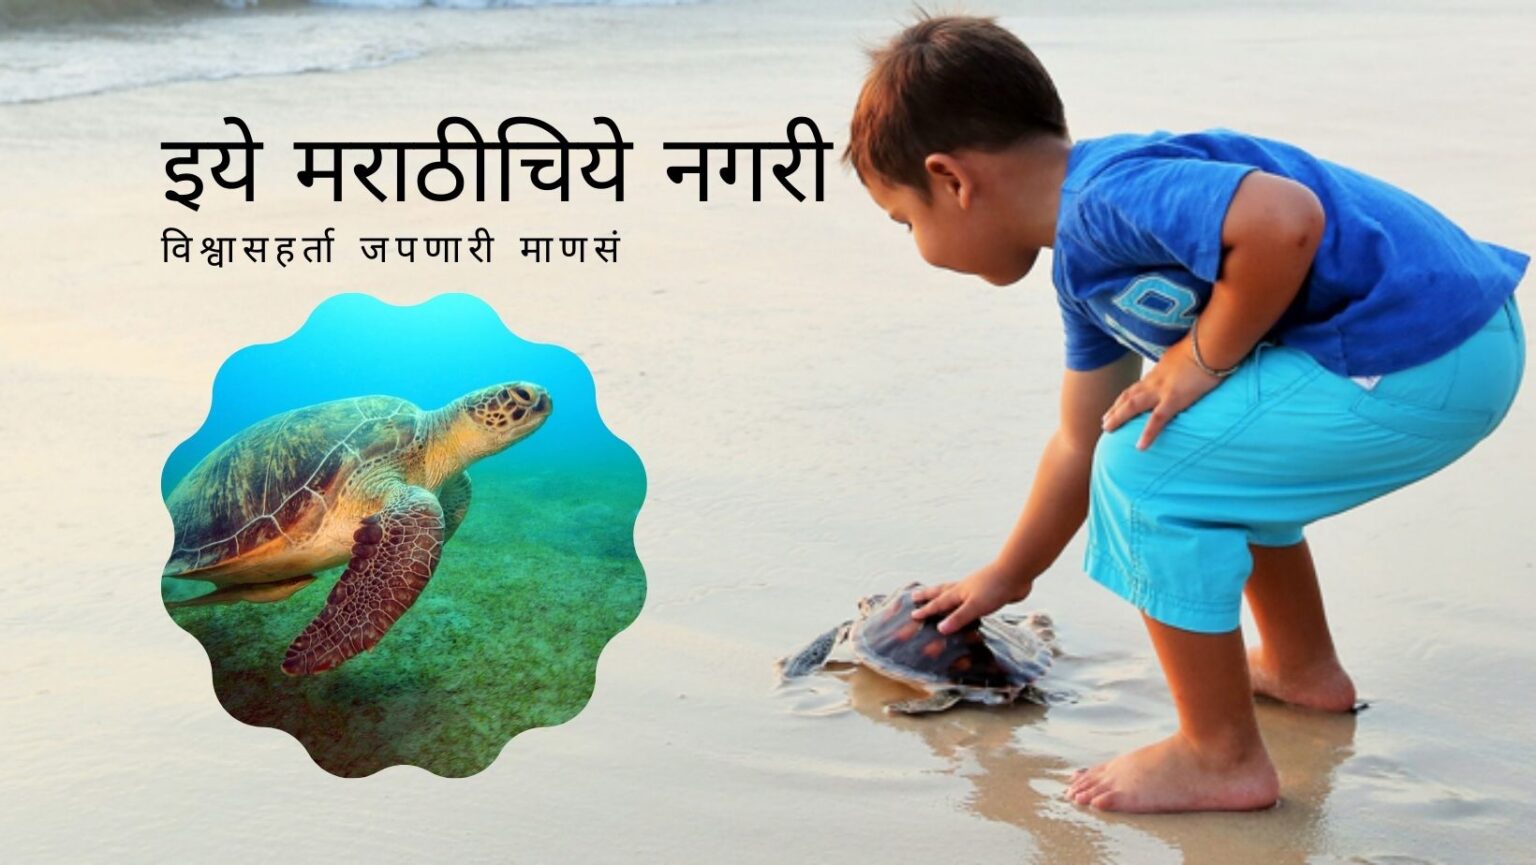 The need for coastal conservation on the occasion of turtles